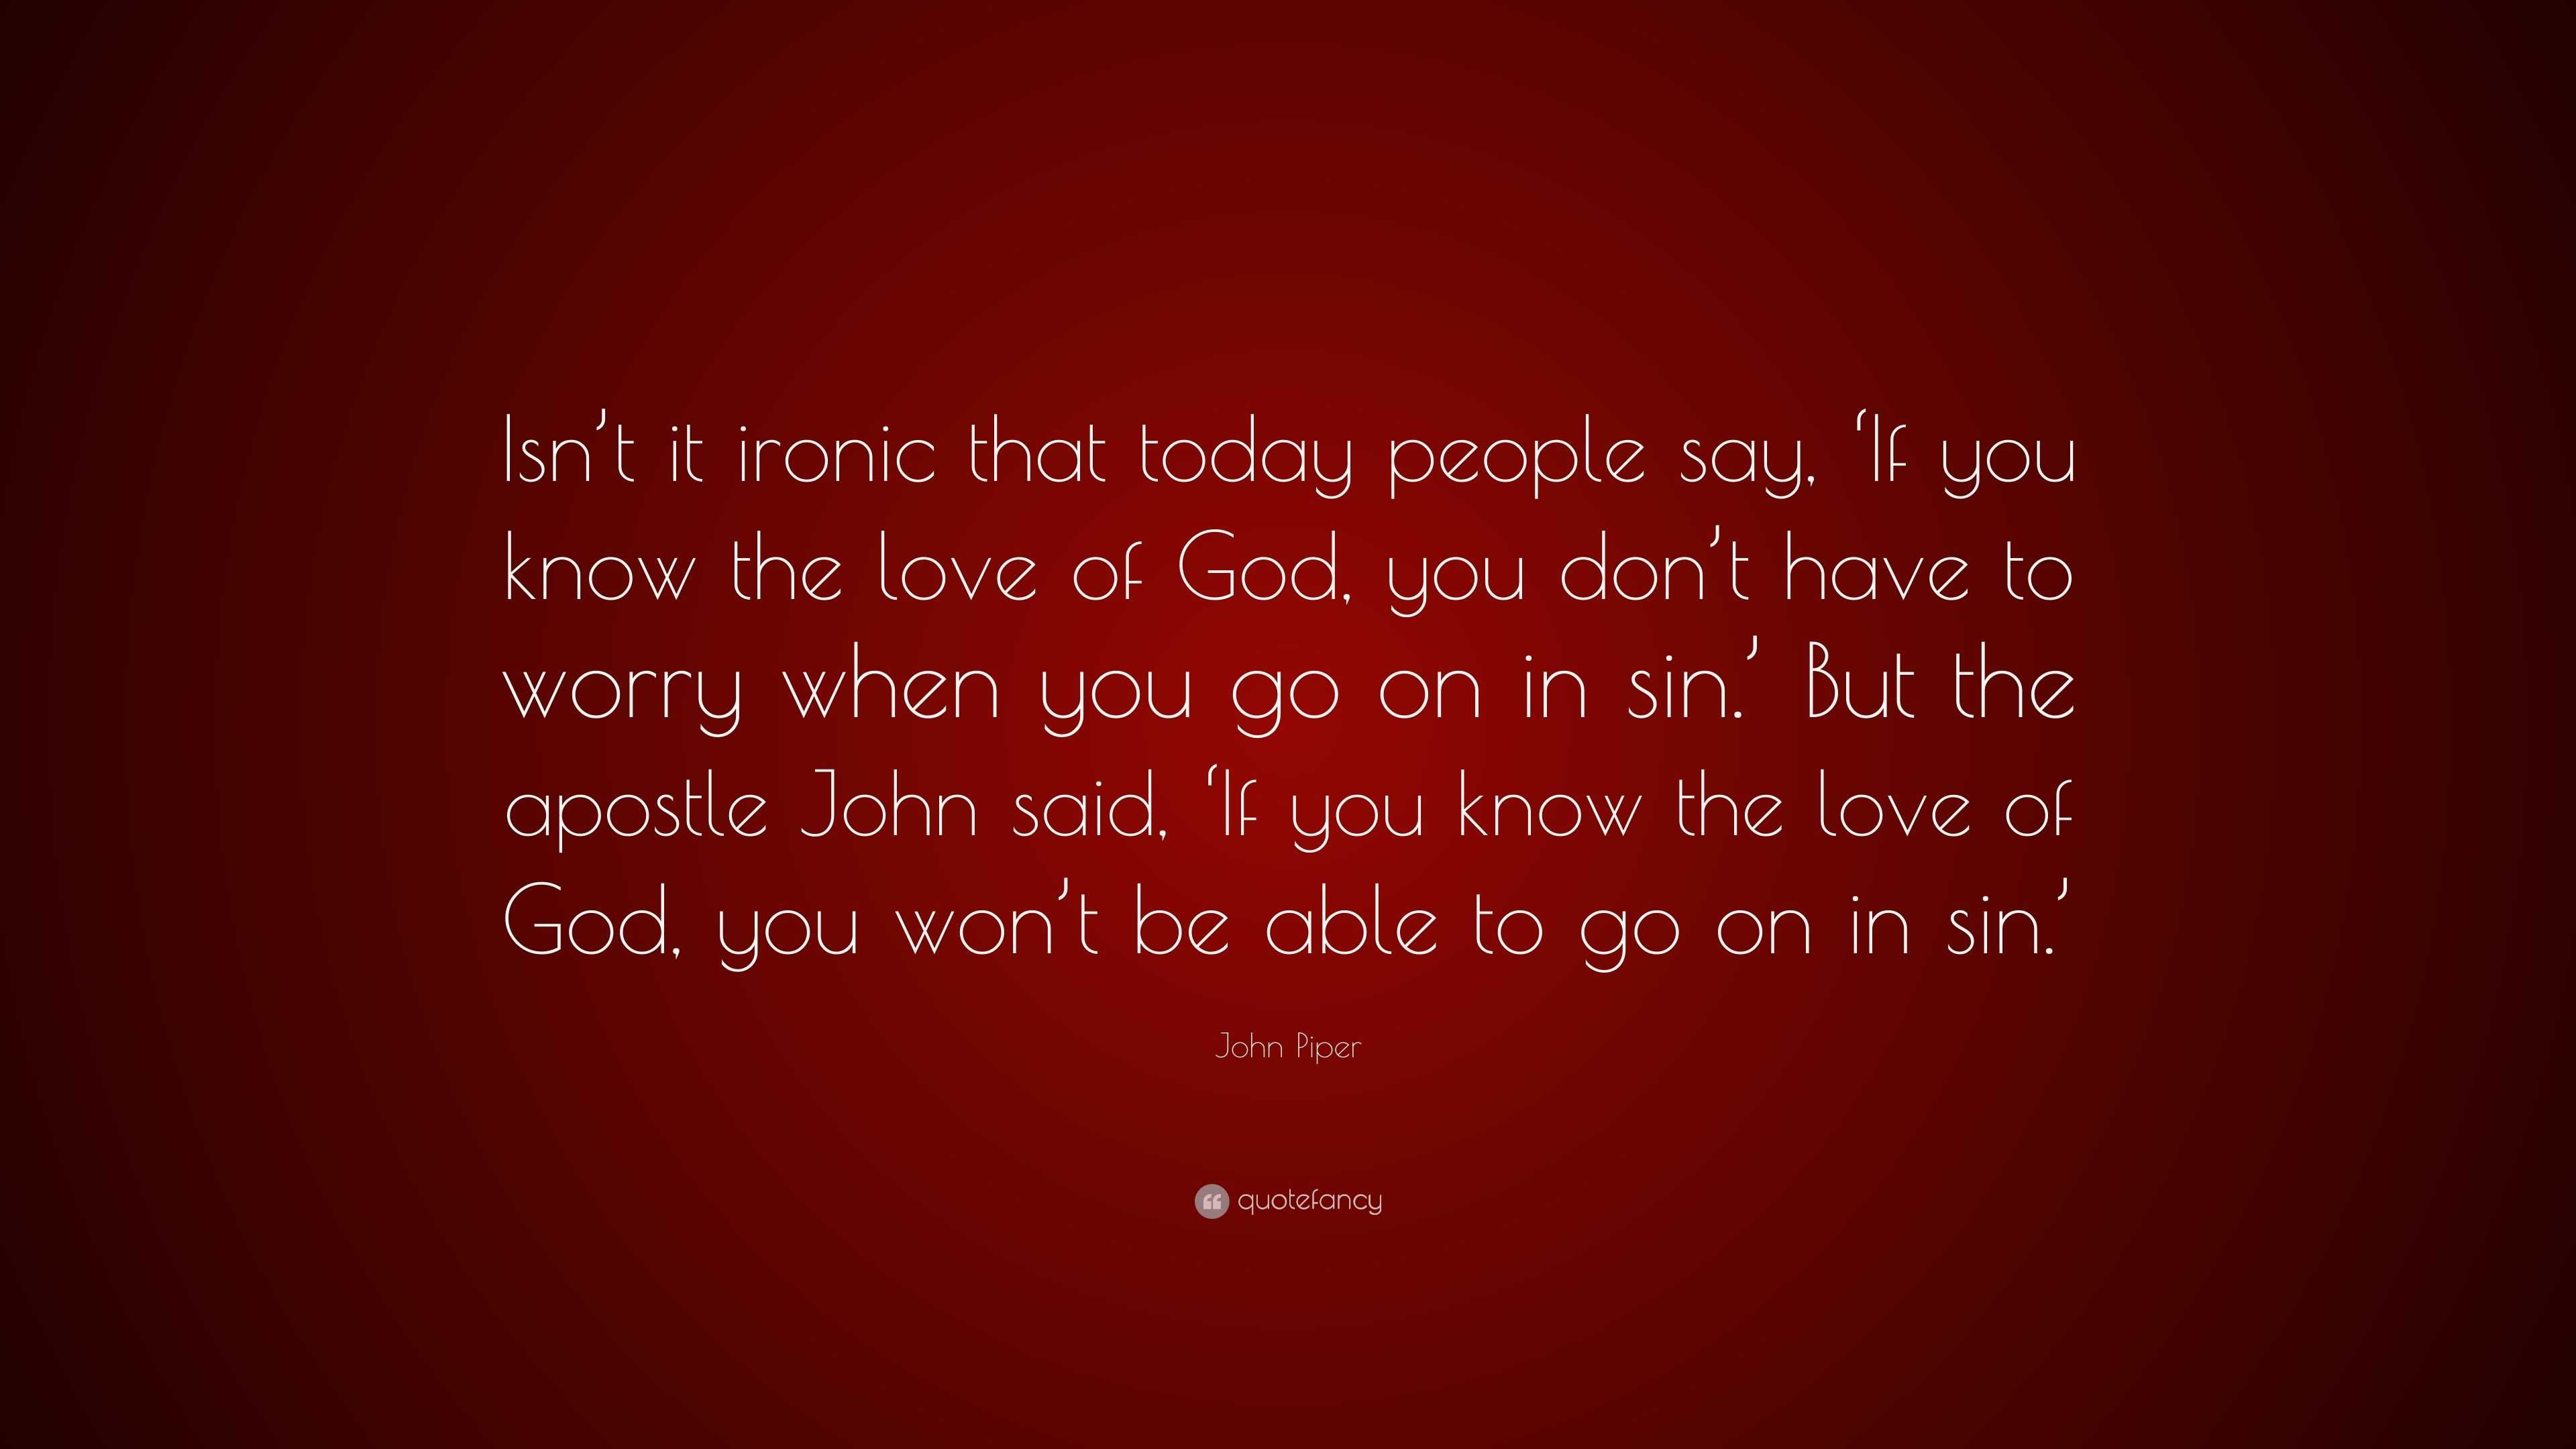 John Piper Quote: "Isn't it ironic that today people say, 'If you know the love of God, you don ...